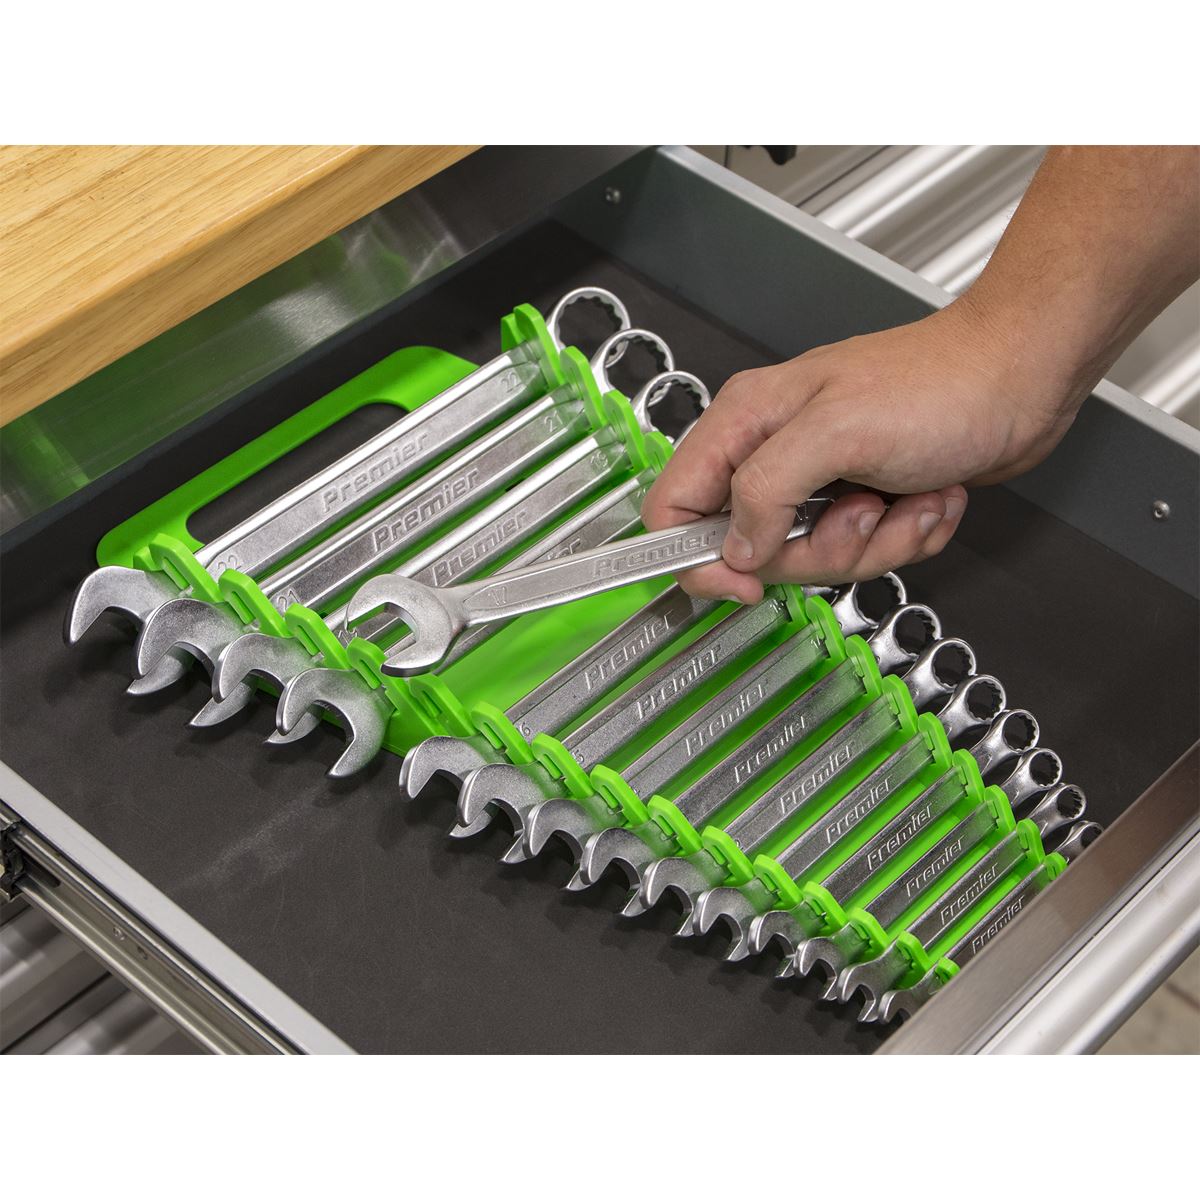 Sealey Premier High Visibility Green Spanner Rack 15 Capacity Hanging Toolbox